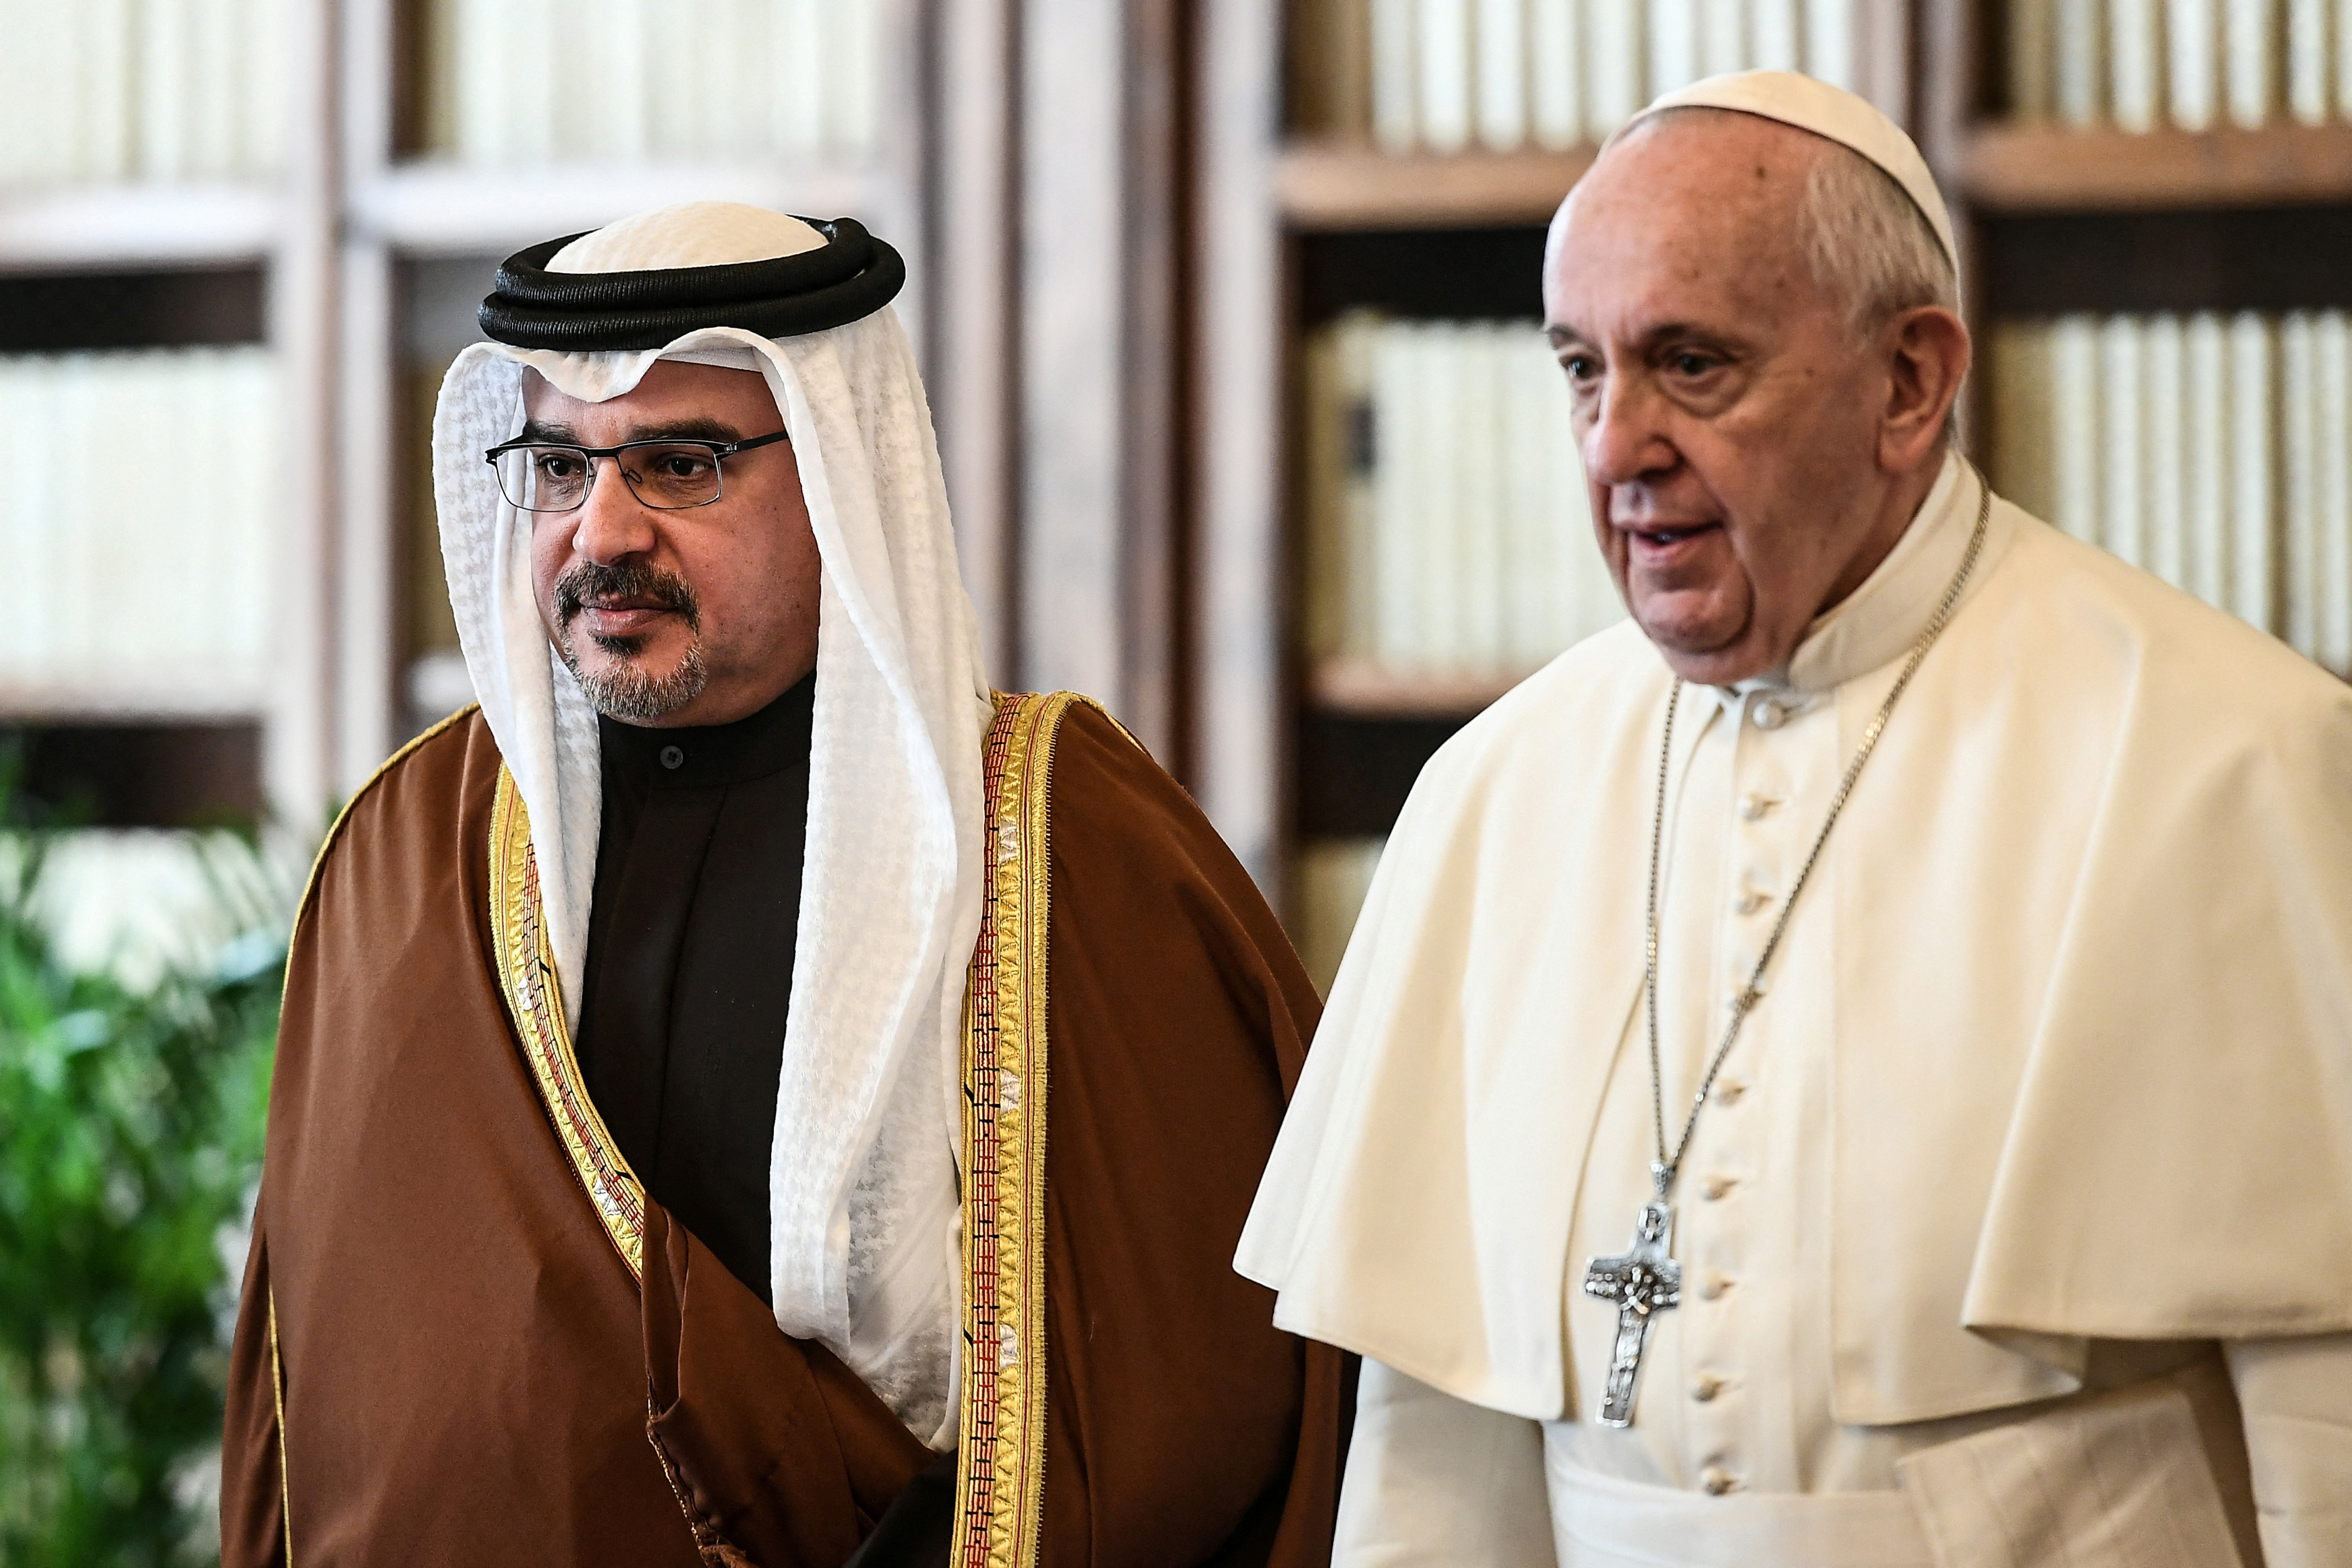 Pope Francis meets with Bahrain's Crown Prince Salman bin Hamad bin Isa al-Khalifa during a private audience at the Vatican